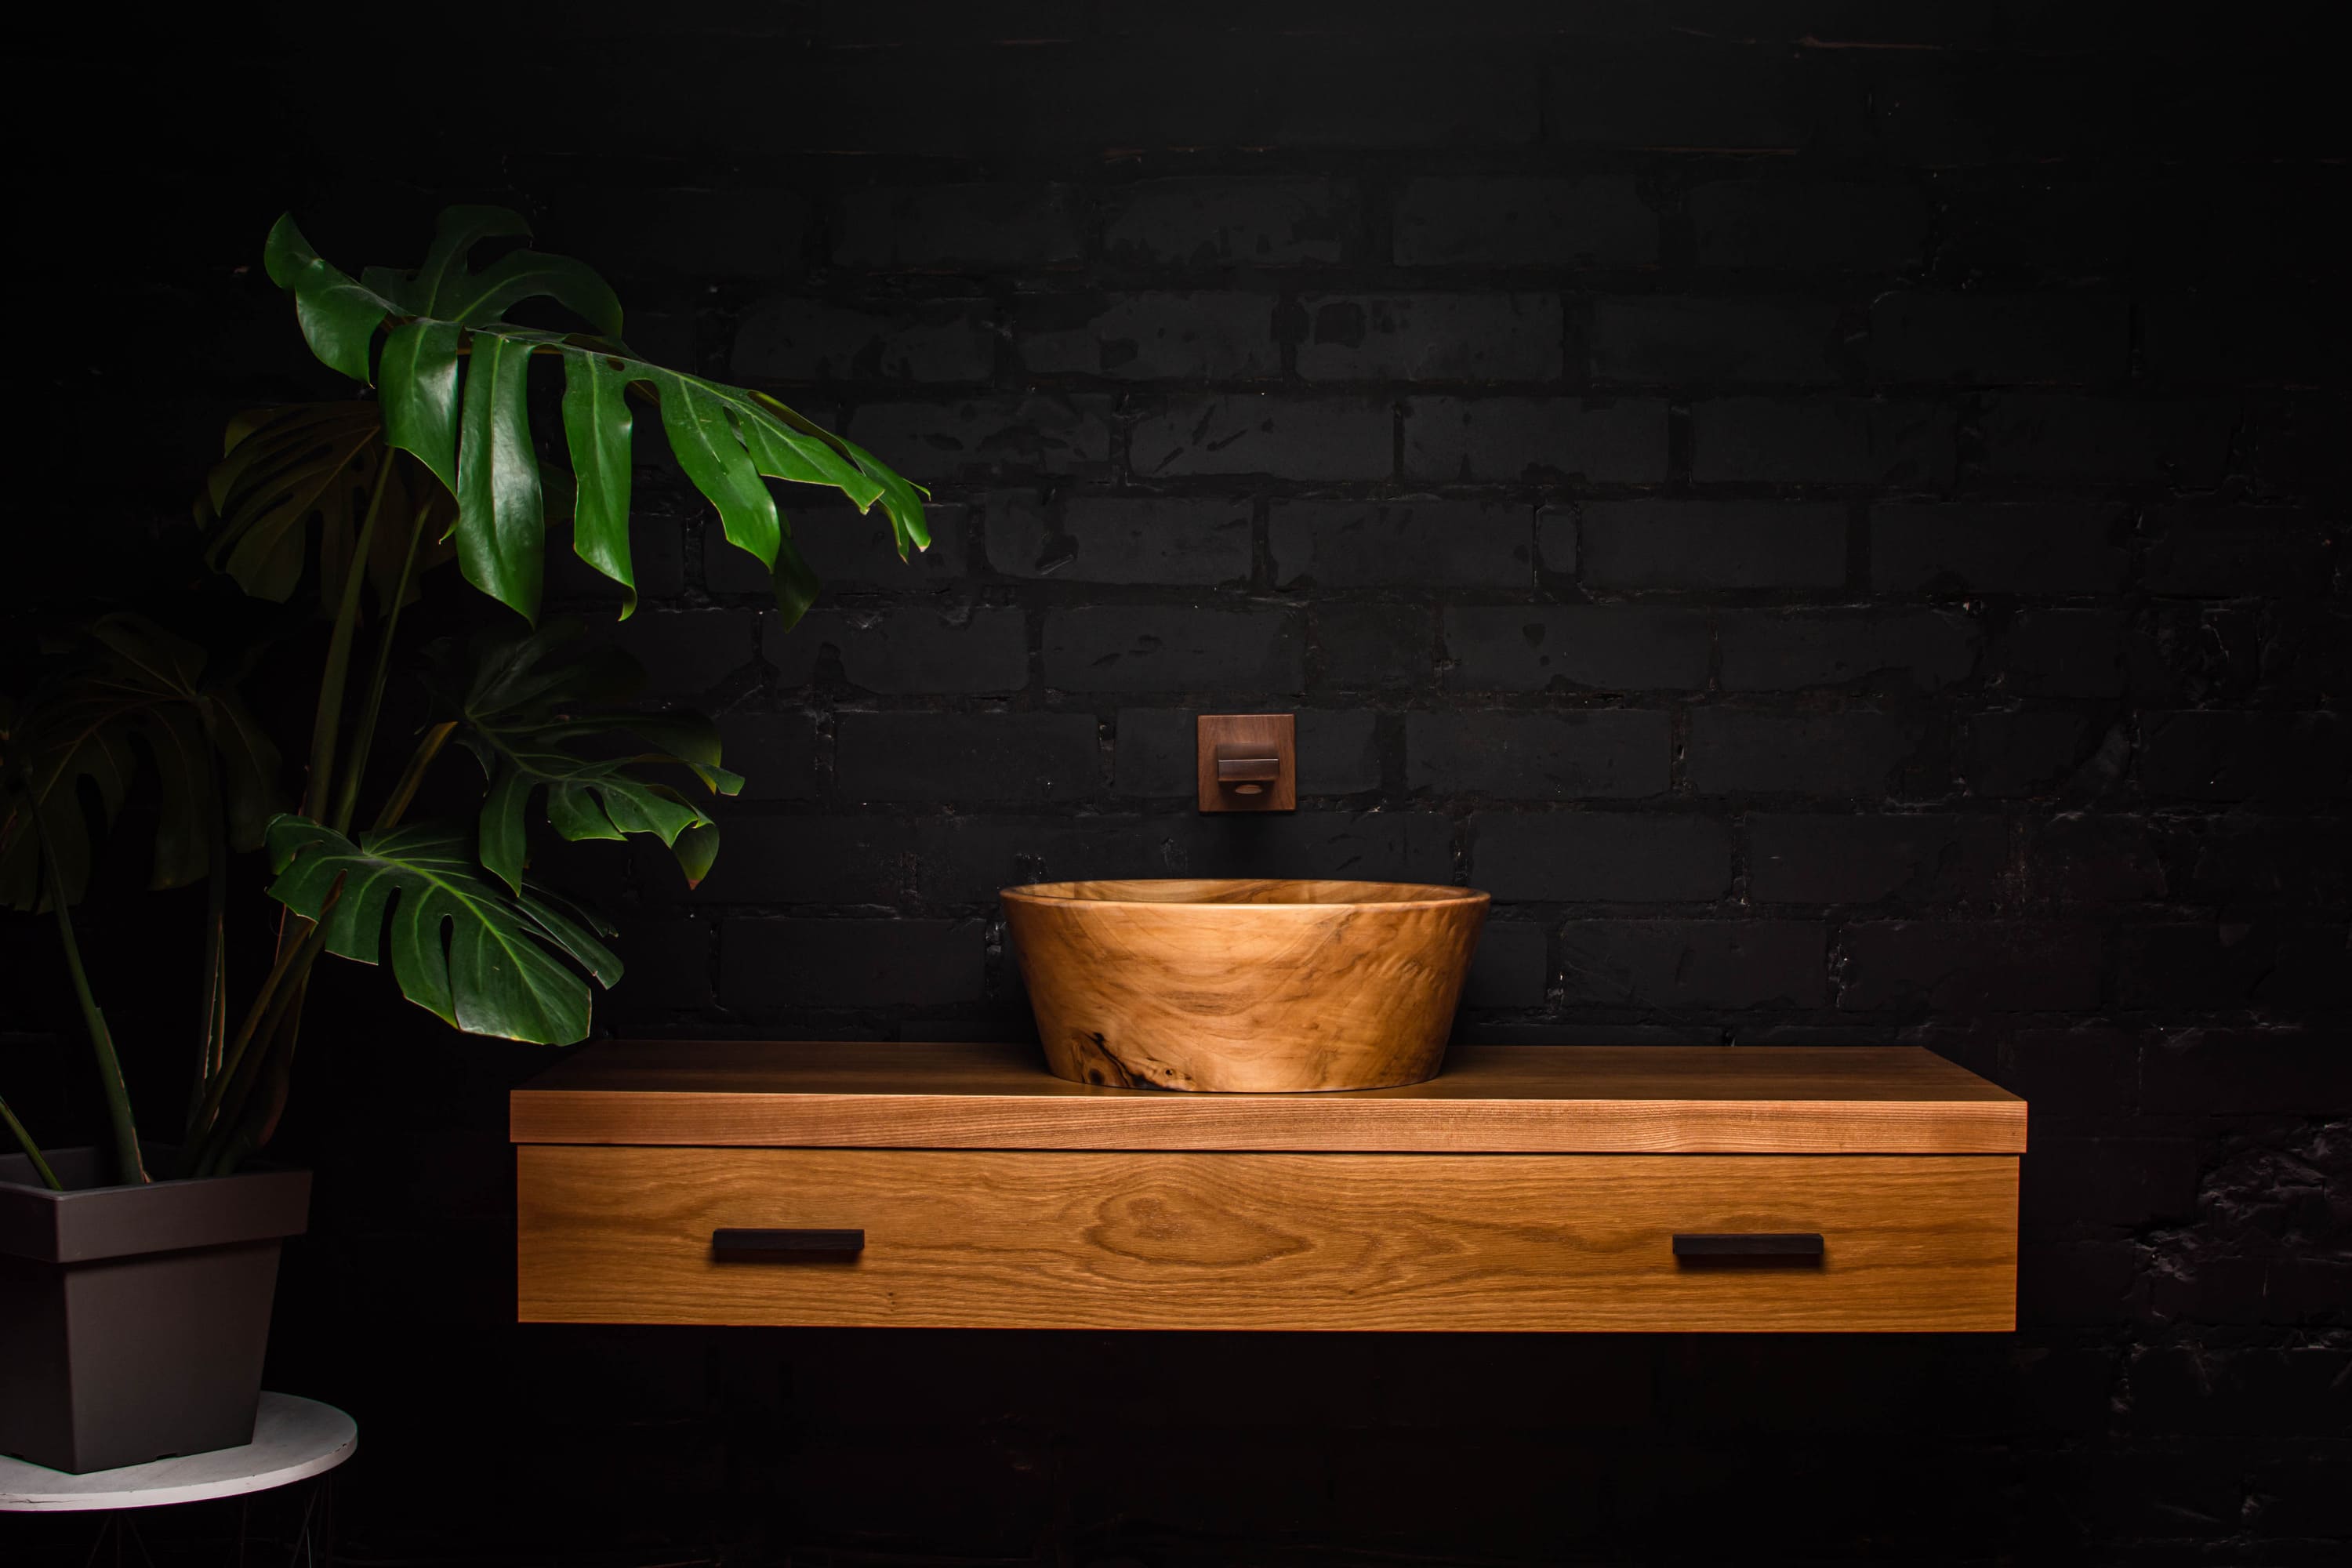 Sophisticated and Elegant Handmade Wooden Sink with Glossy Resin Surface